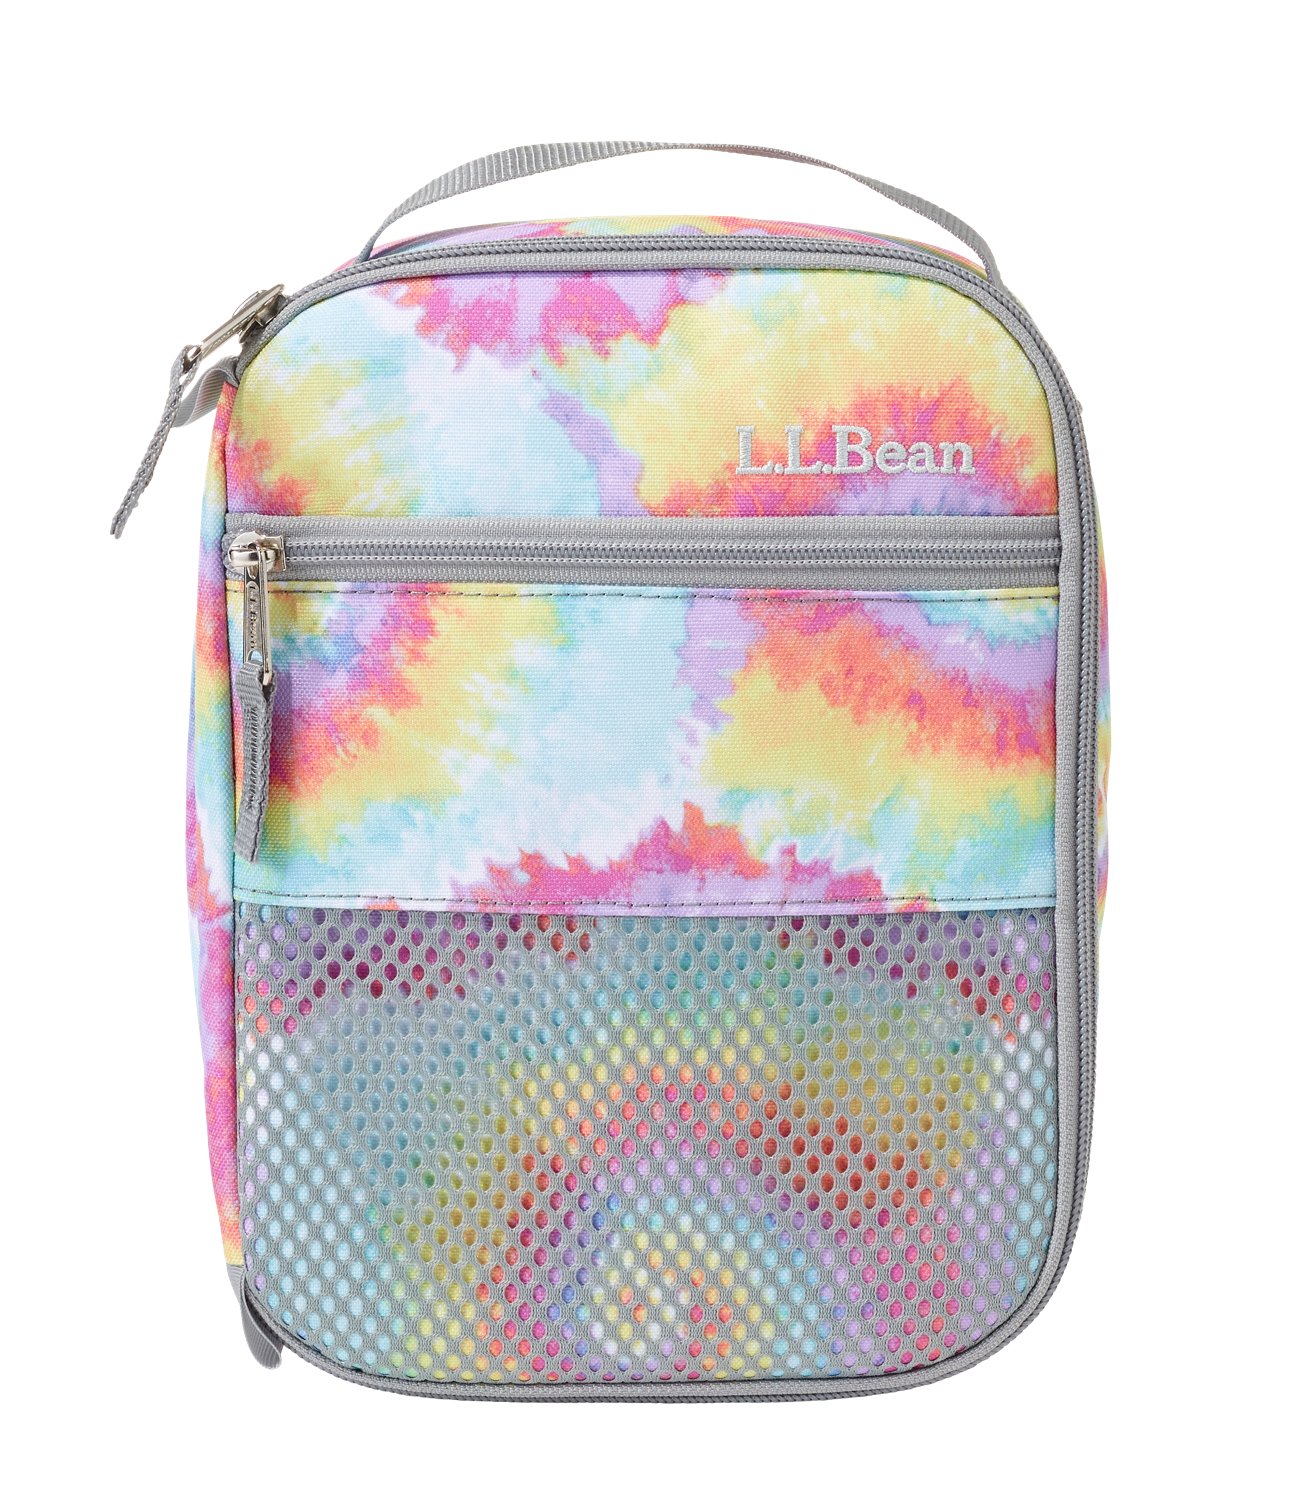 L.L.Bean Tie Dye Lunch Box | Free Shipping at Academy